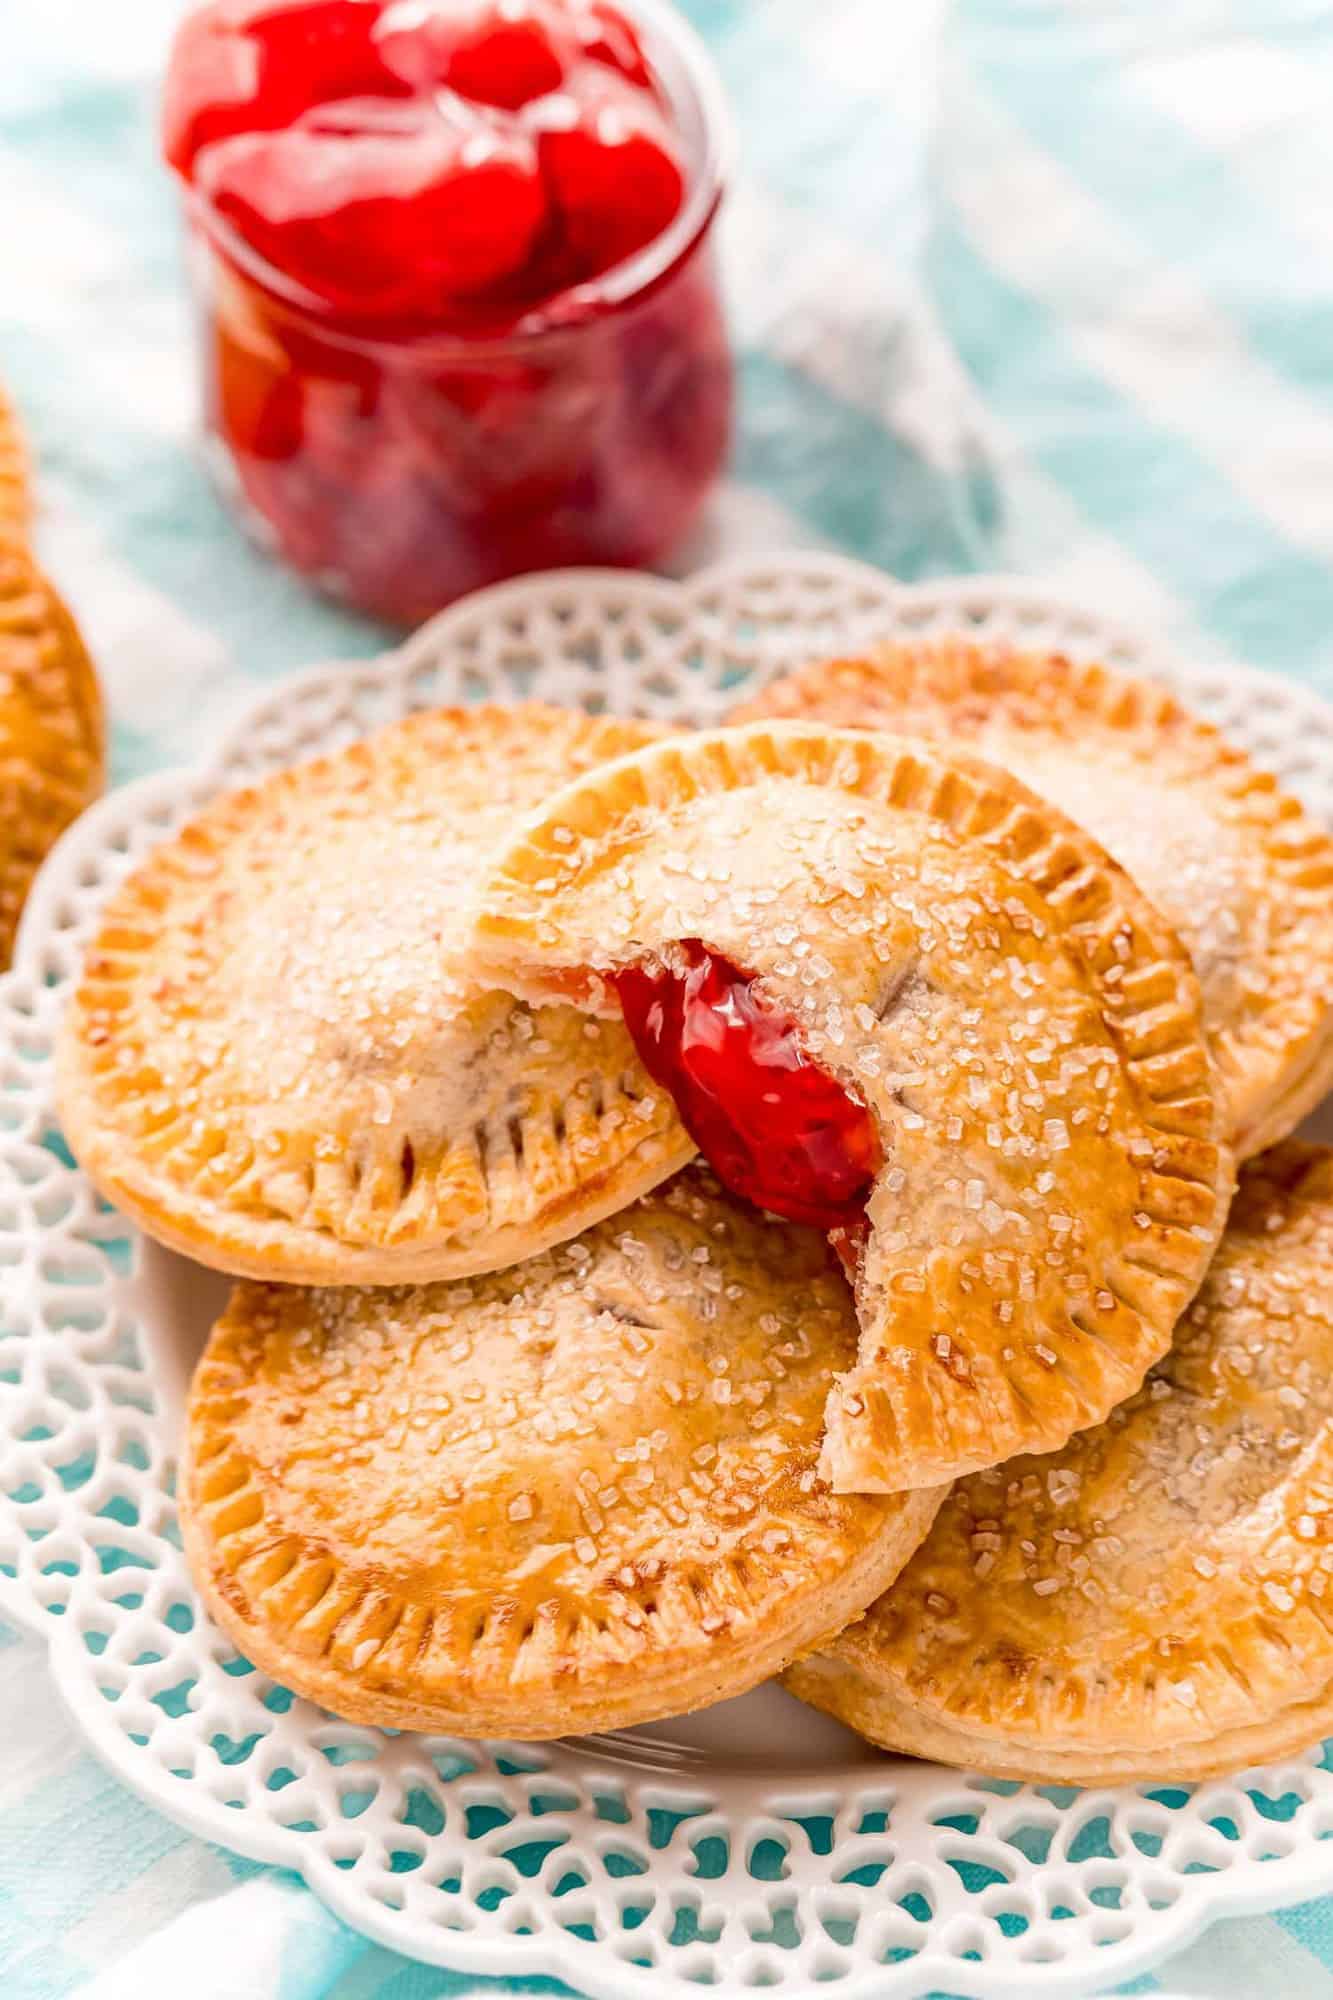 Pile of cherry hand pies on a decorative white plate.